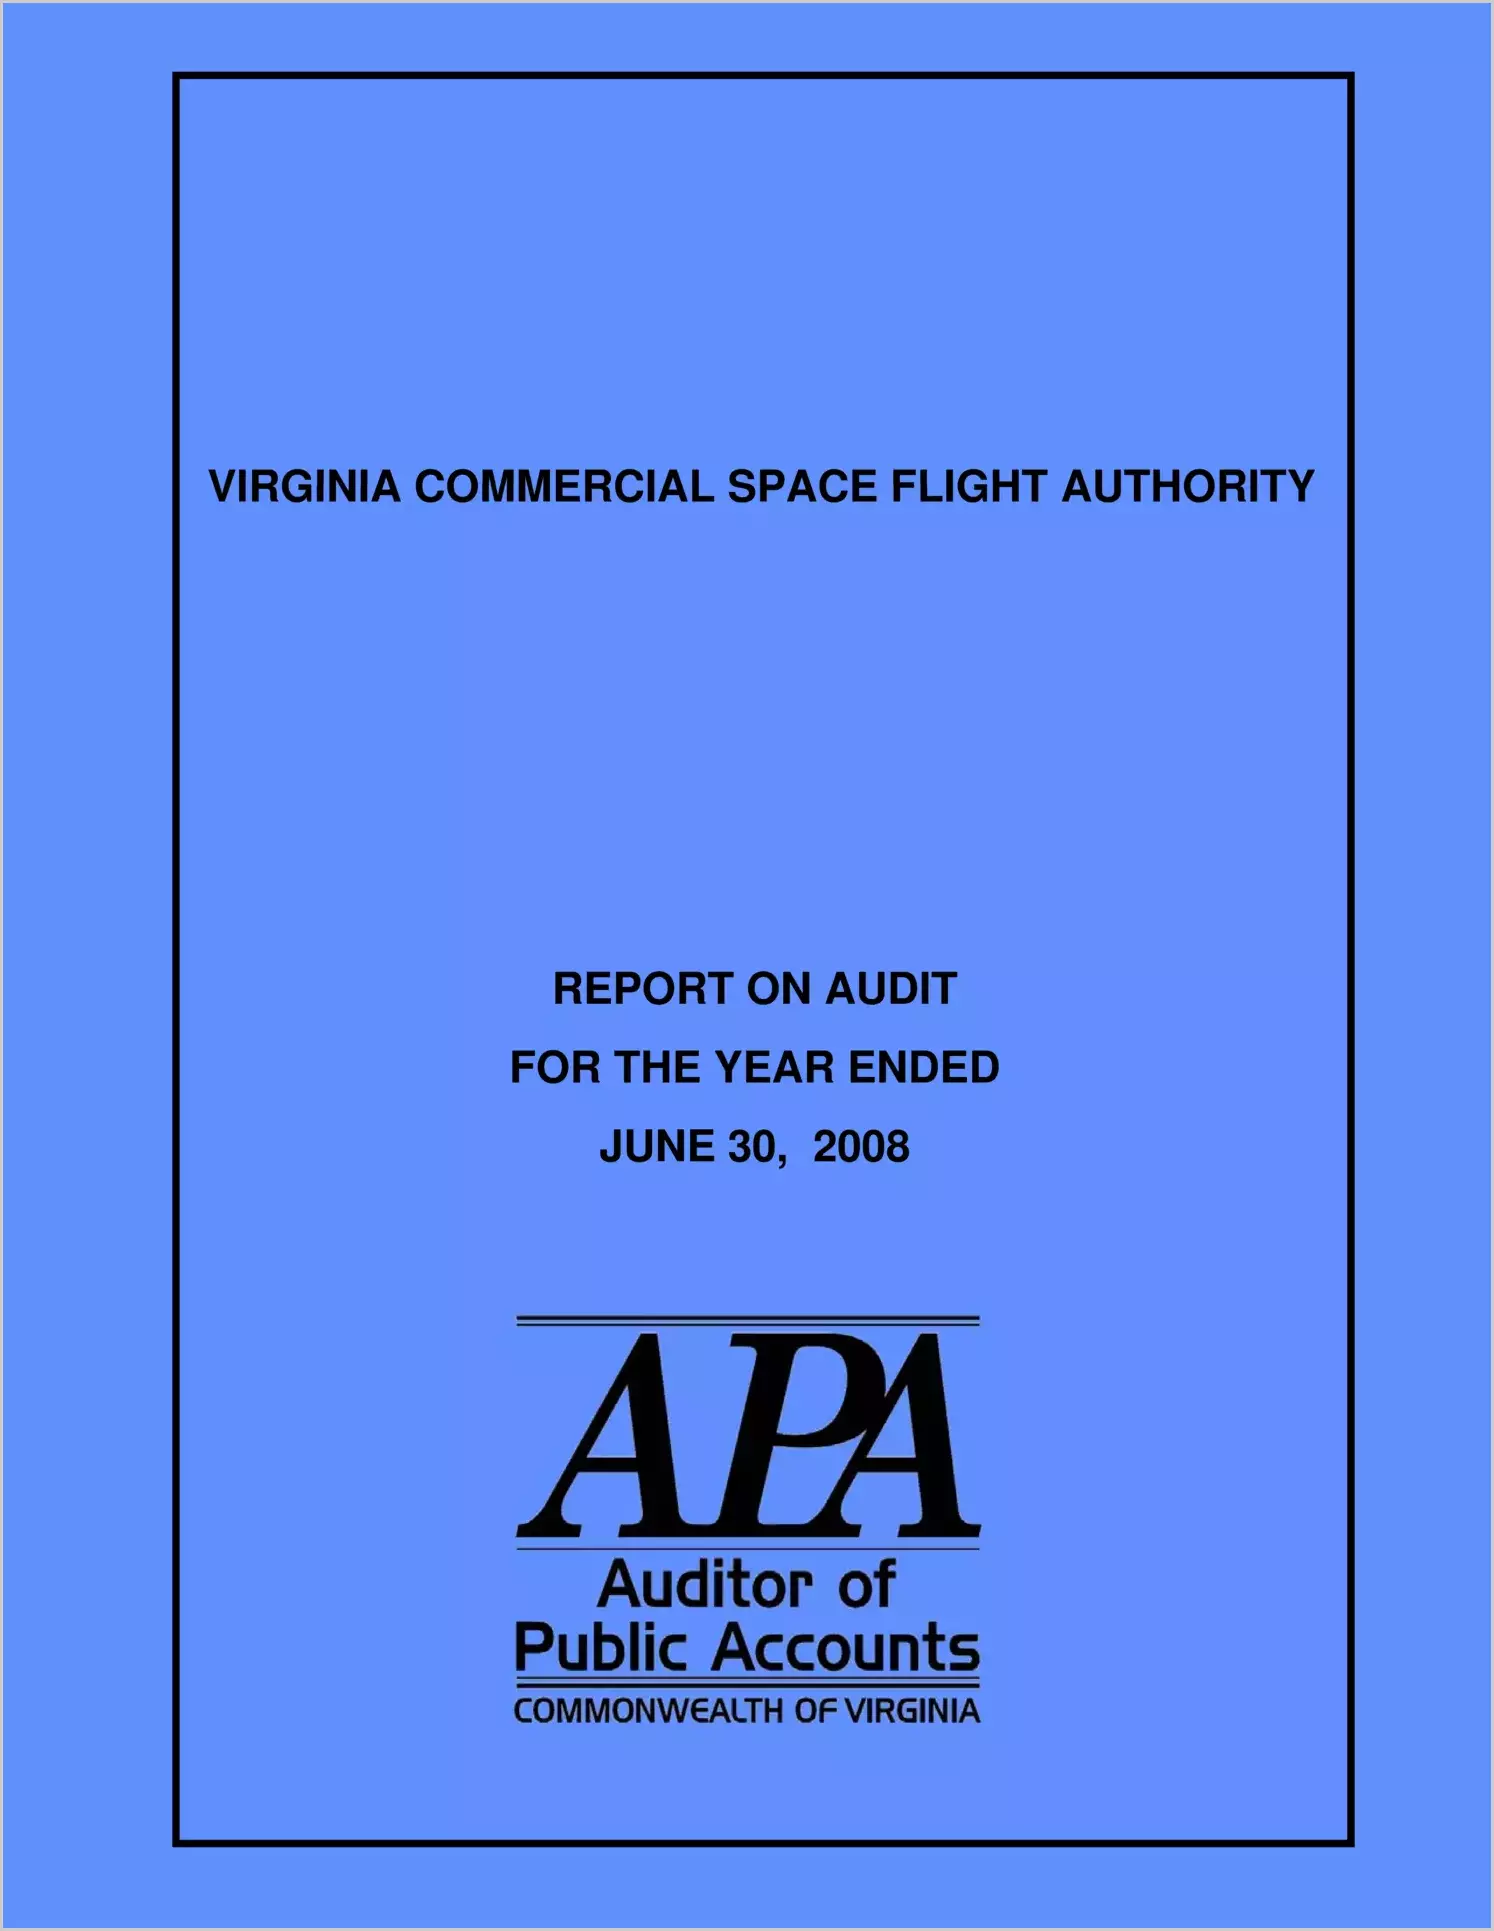 Virginia Commercial Space Flight Authority for the year ended June 30, 2008